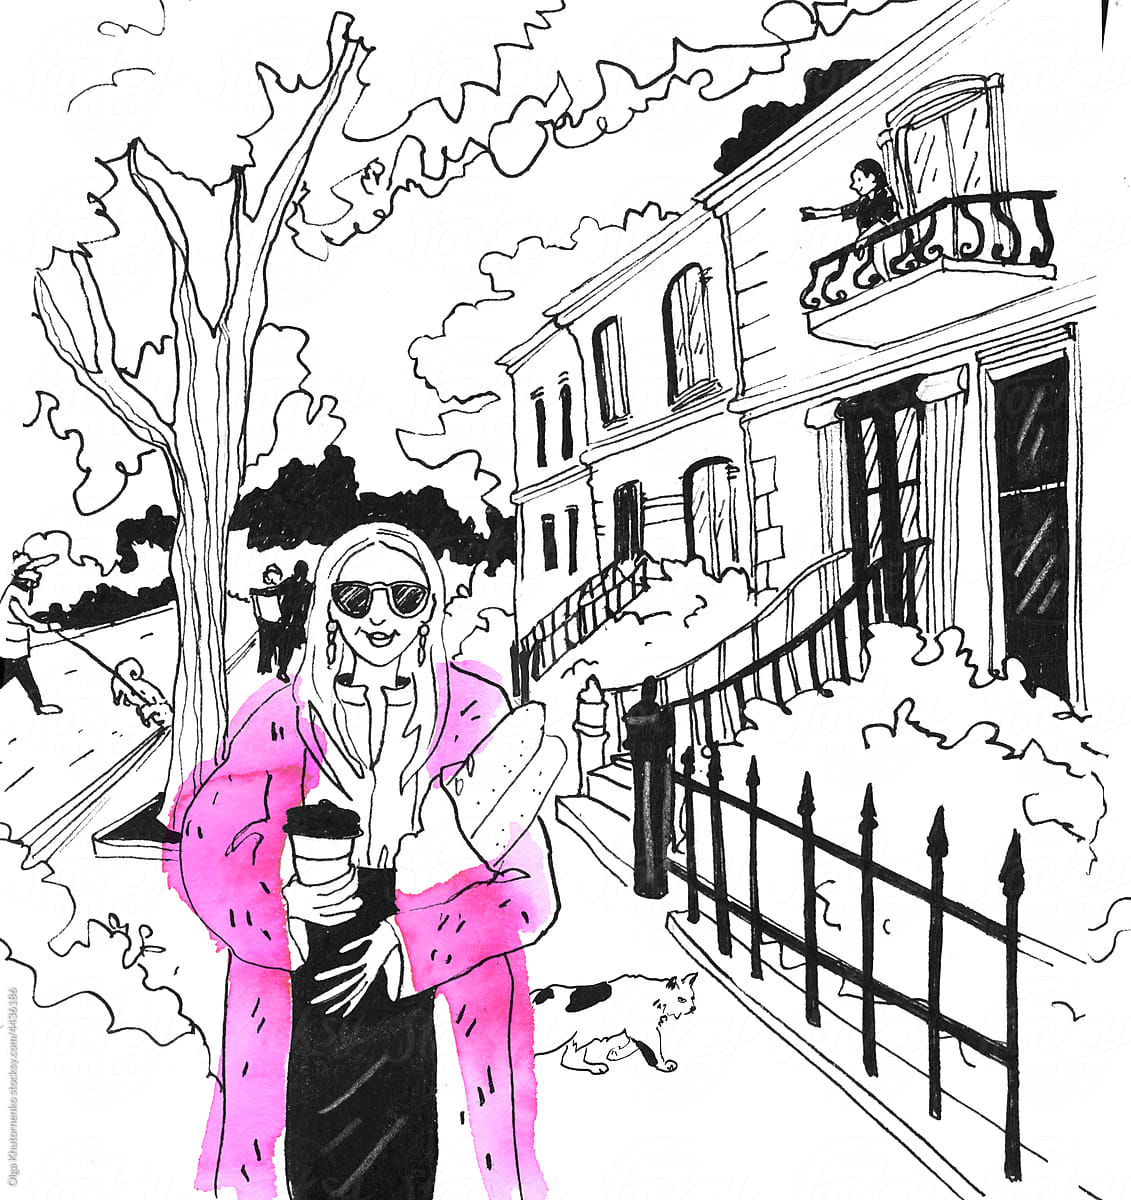 The young woman in a pink coat with coffee